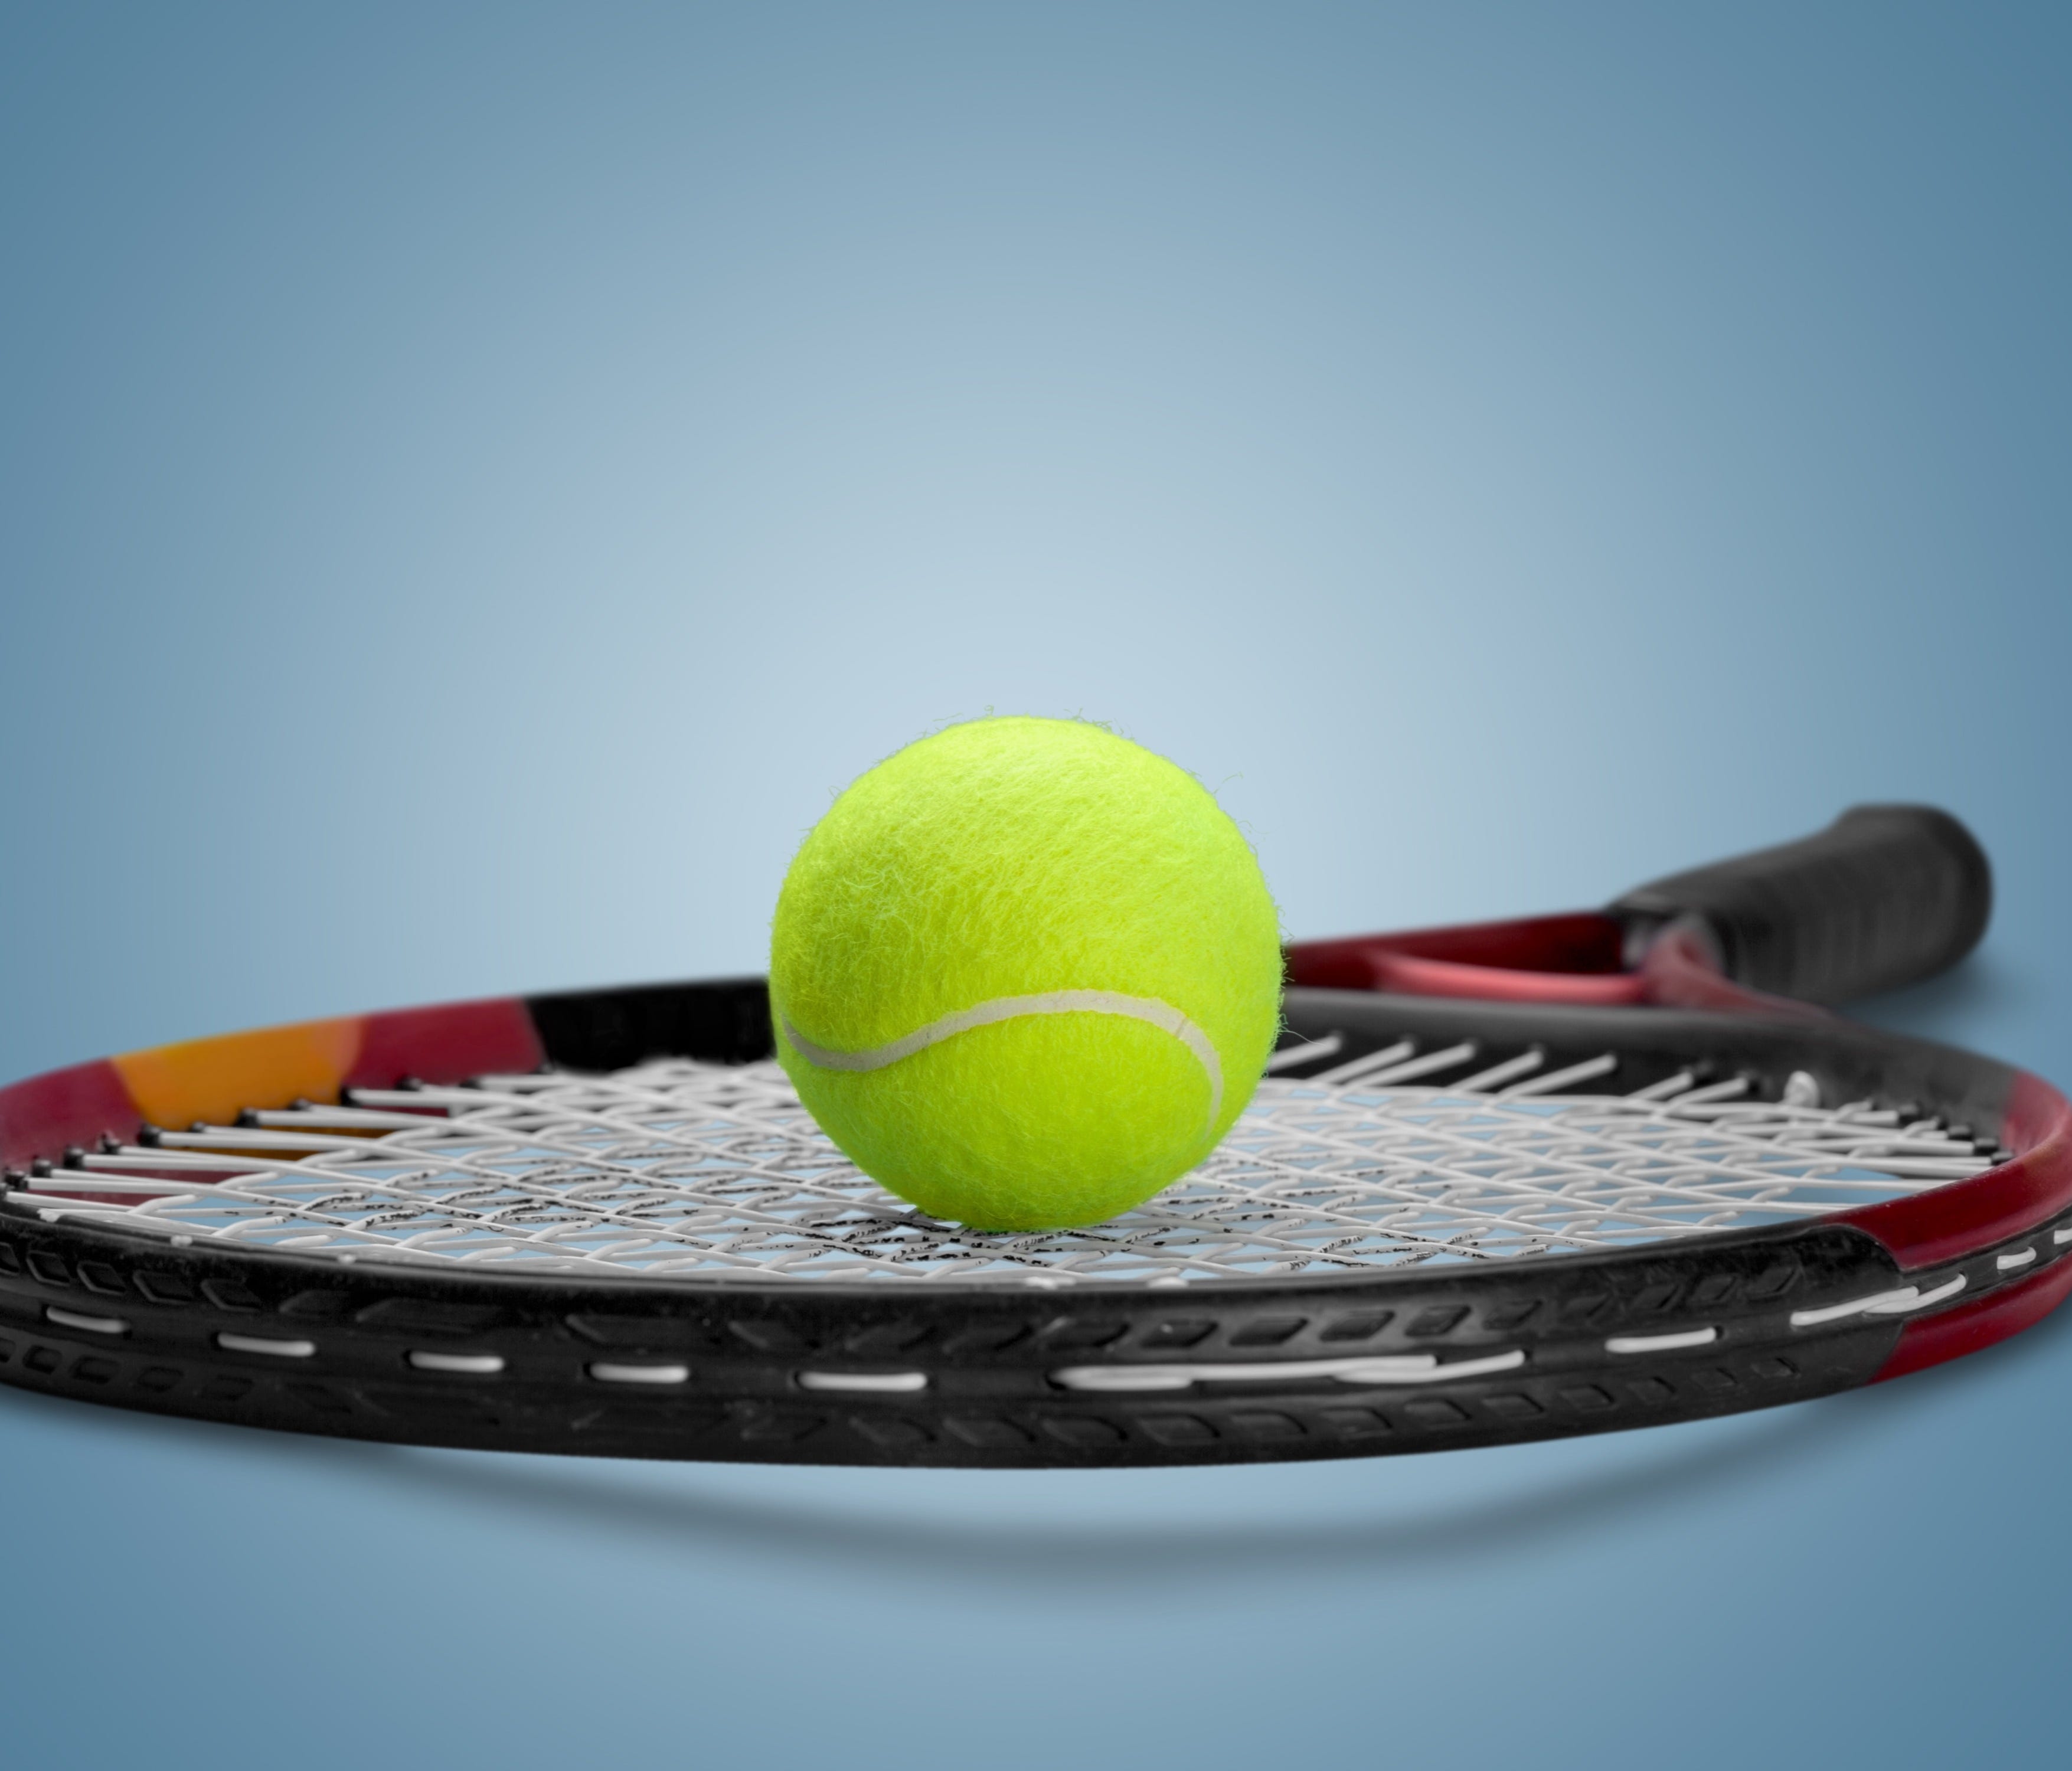 Generic view of a tennis ball and racket.